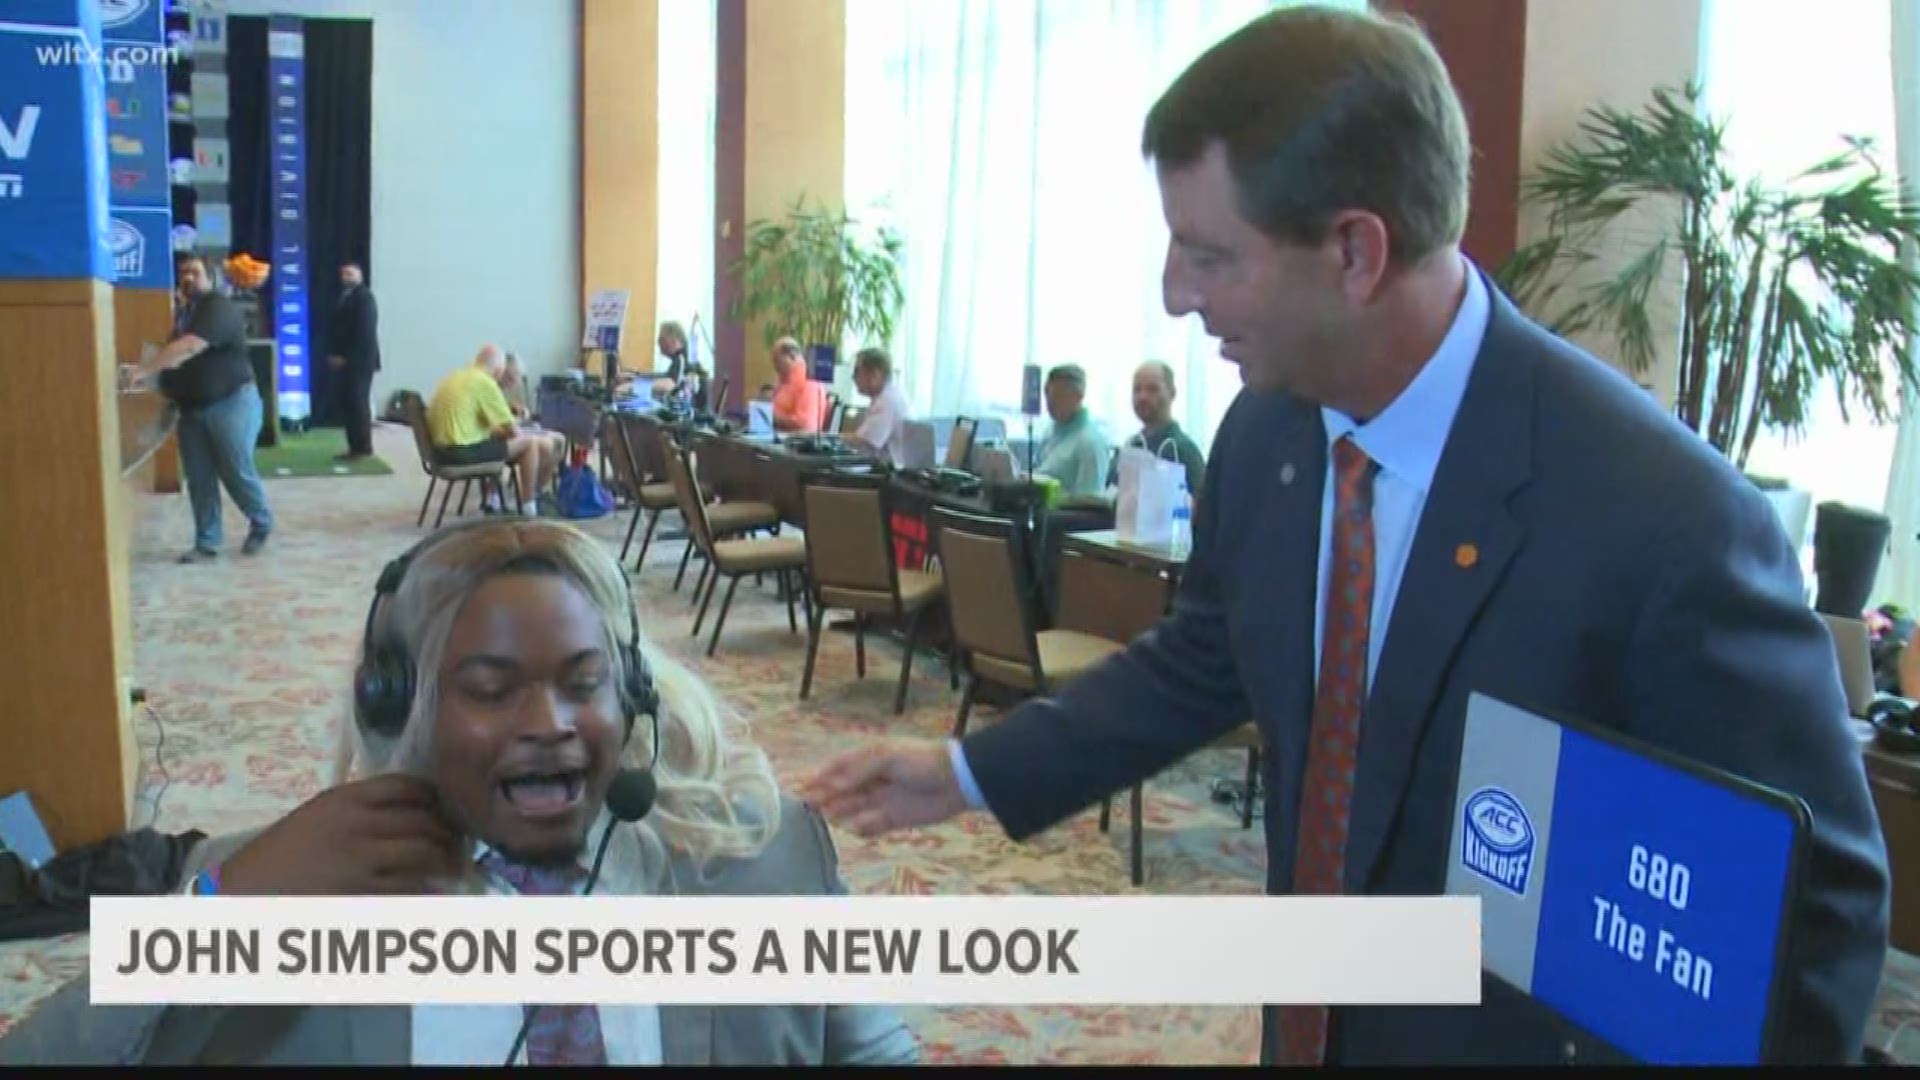 Clemson offensive lineman John Simpson has some fun at ACC Kickoff as he uses a blonde wig to take on a new persona.